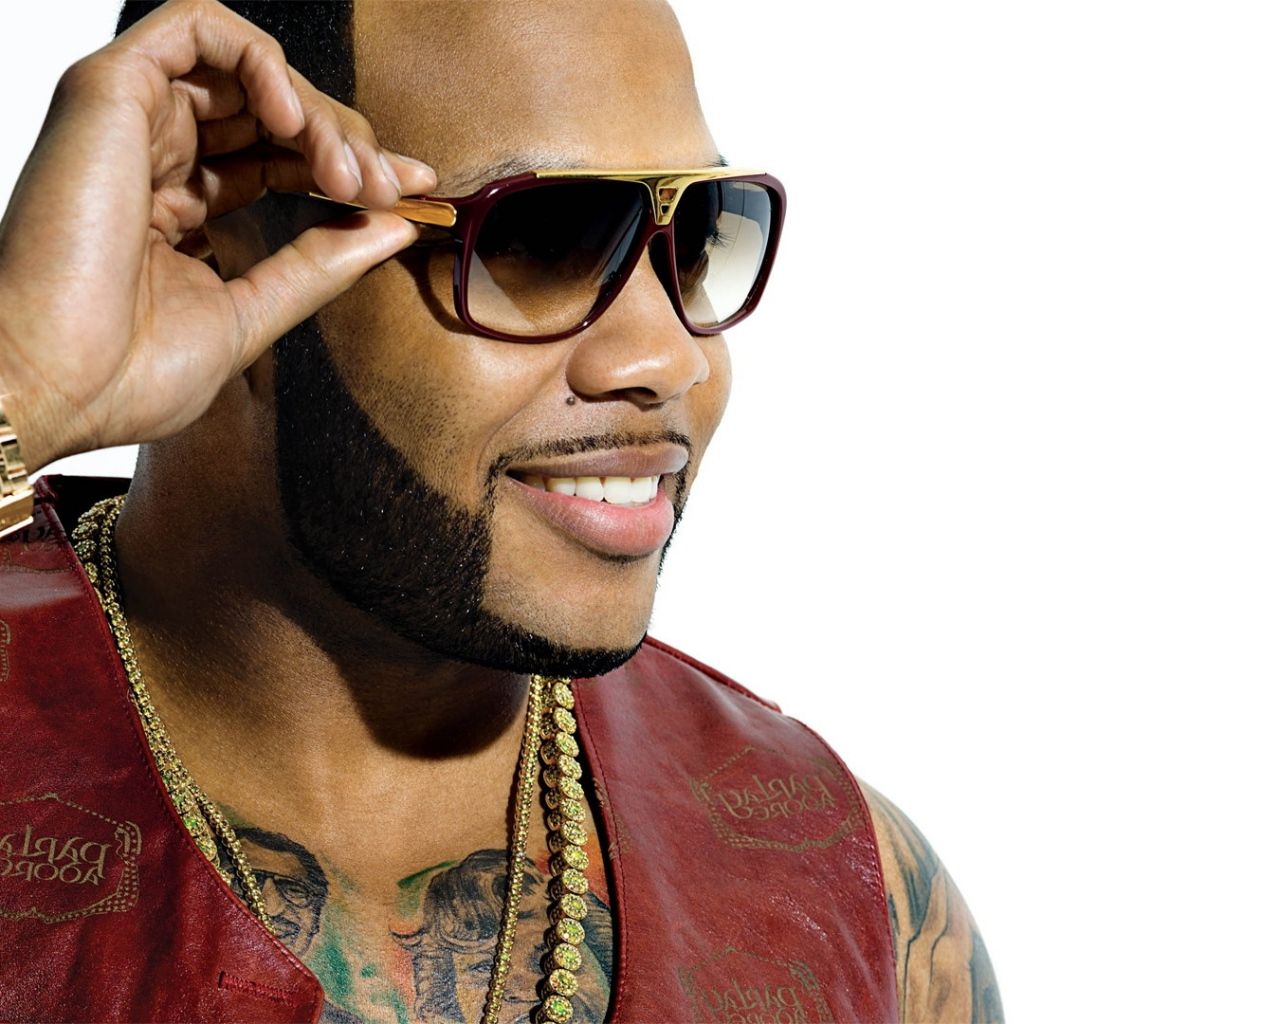 Download Wallpaper 1280x1024 Flo rida, Glasses, Smile, Watches